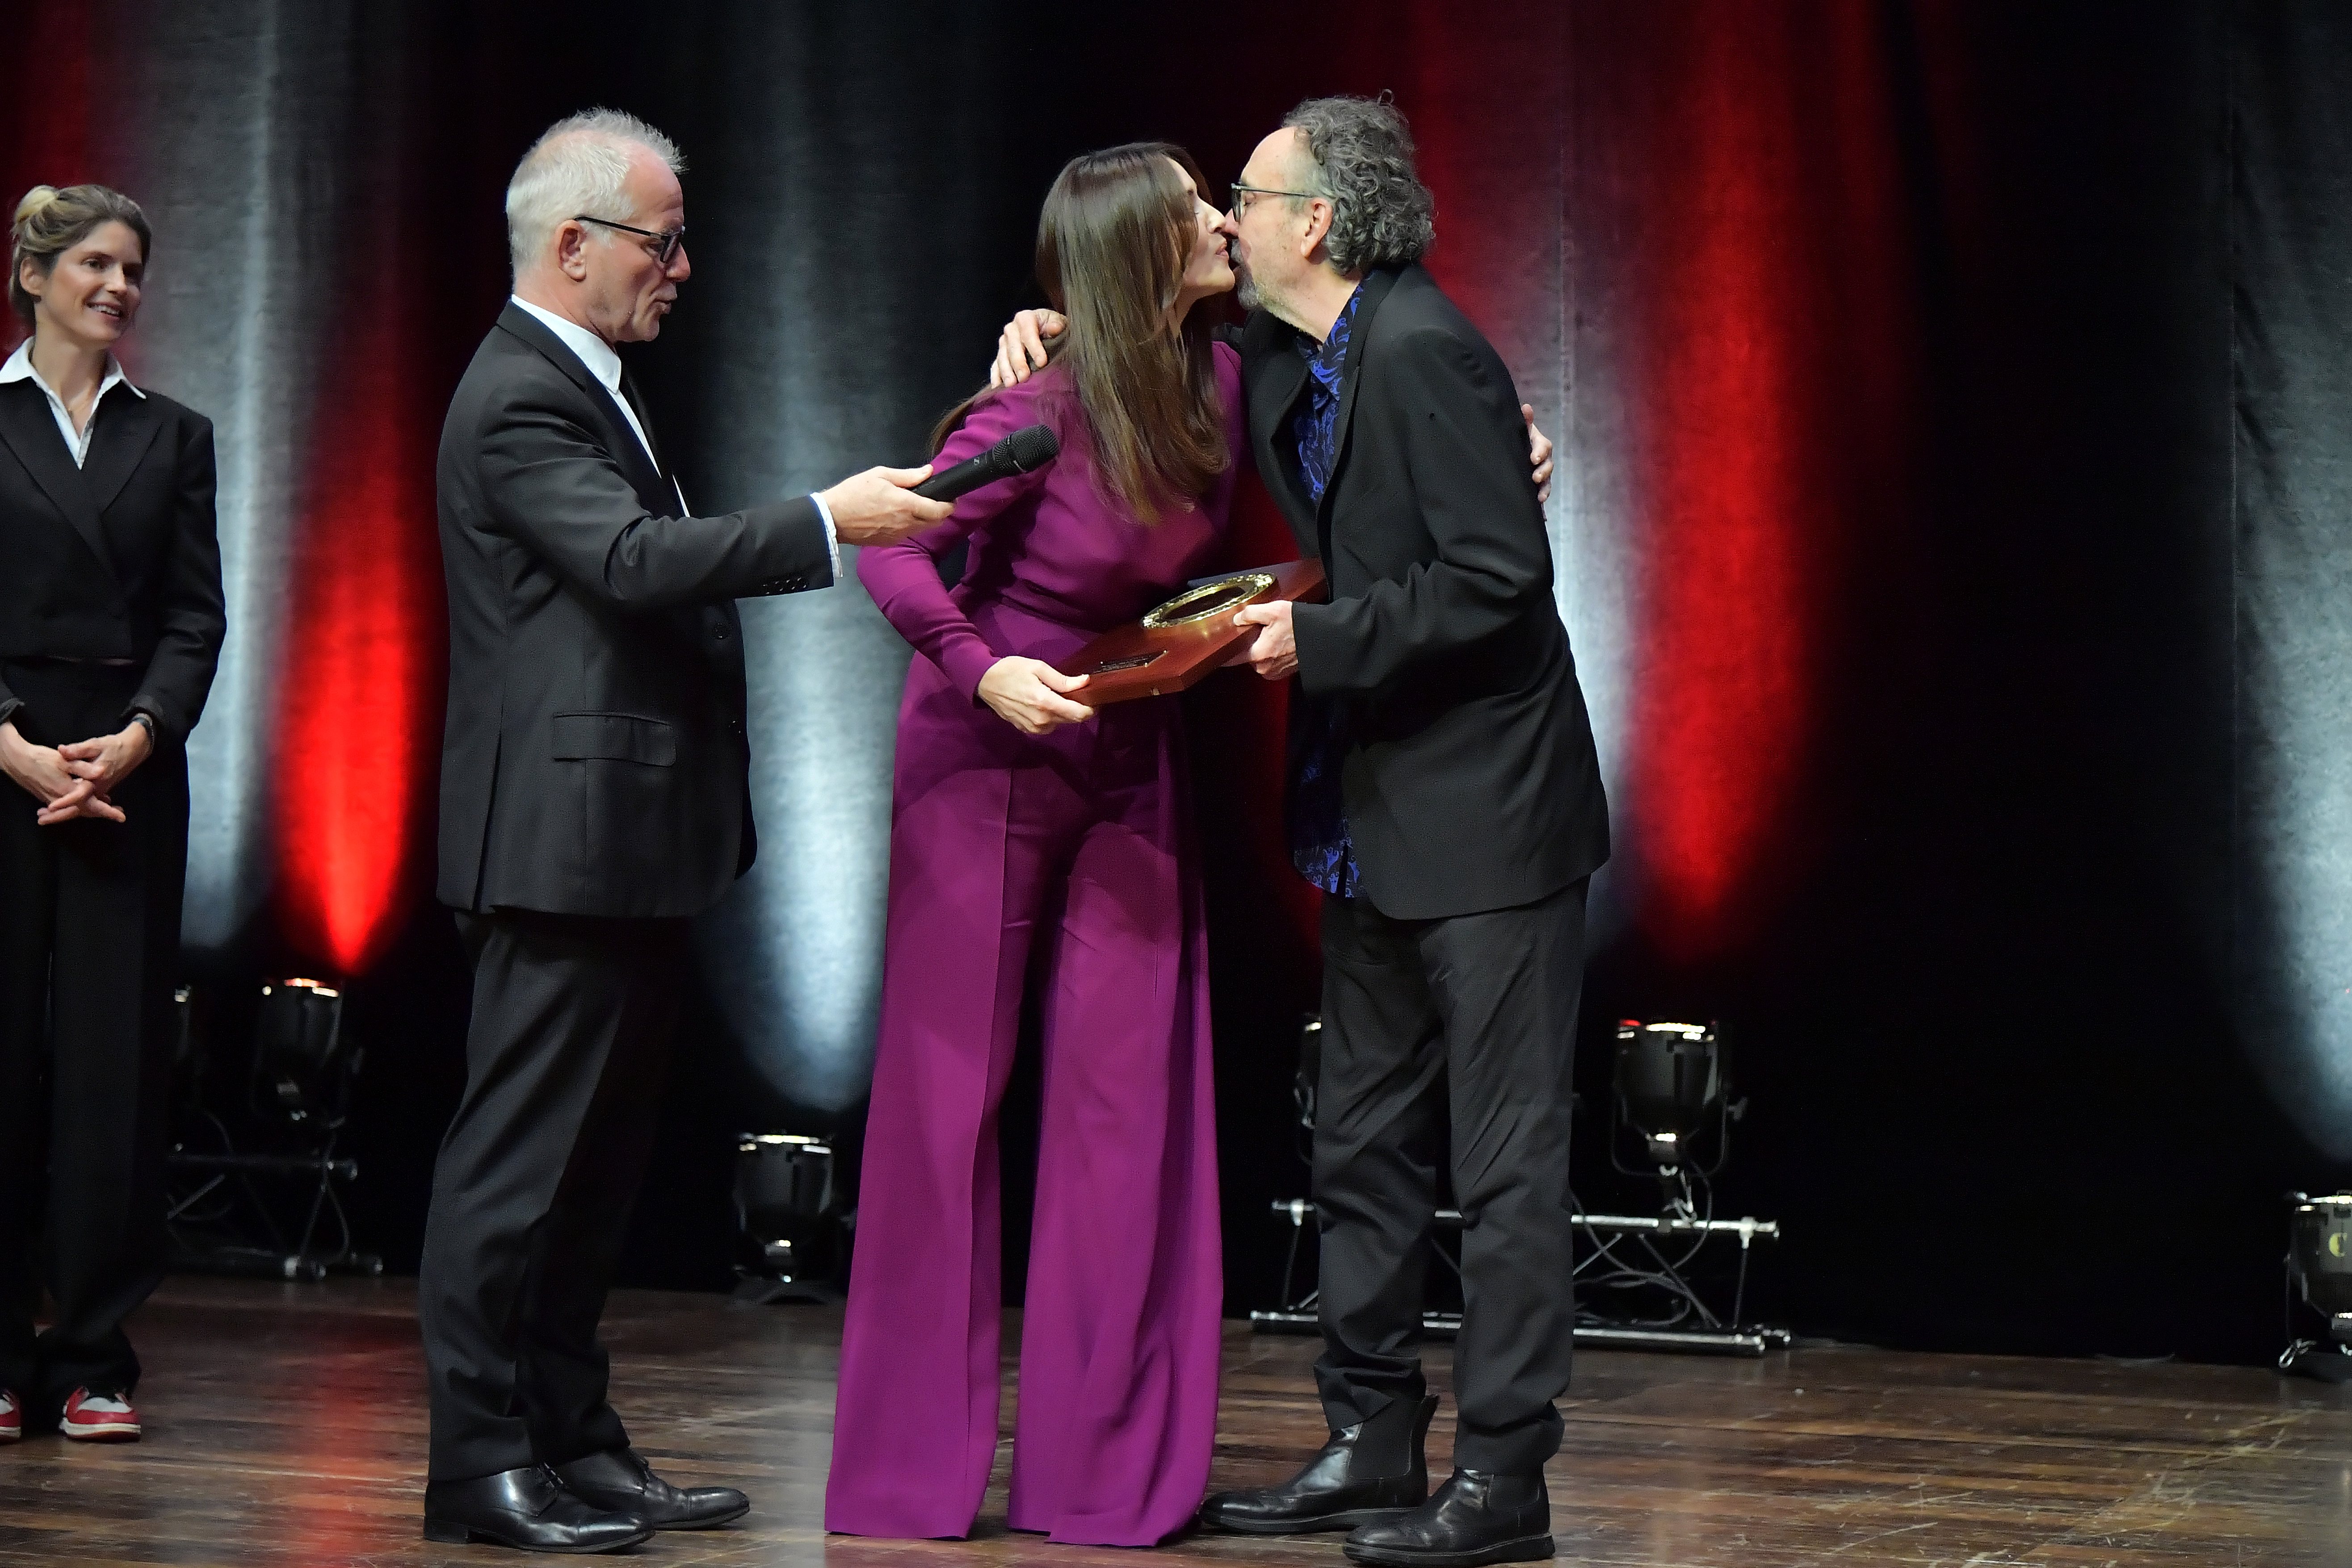 Monica Bellucci and Tim Burton during the Tim Burton Lumiere Award ceremony in Lyon, France on October 21, 2022 | Source: Getty Images